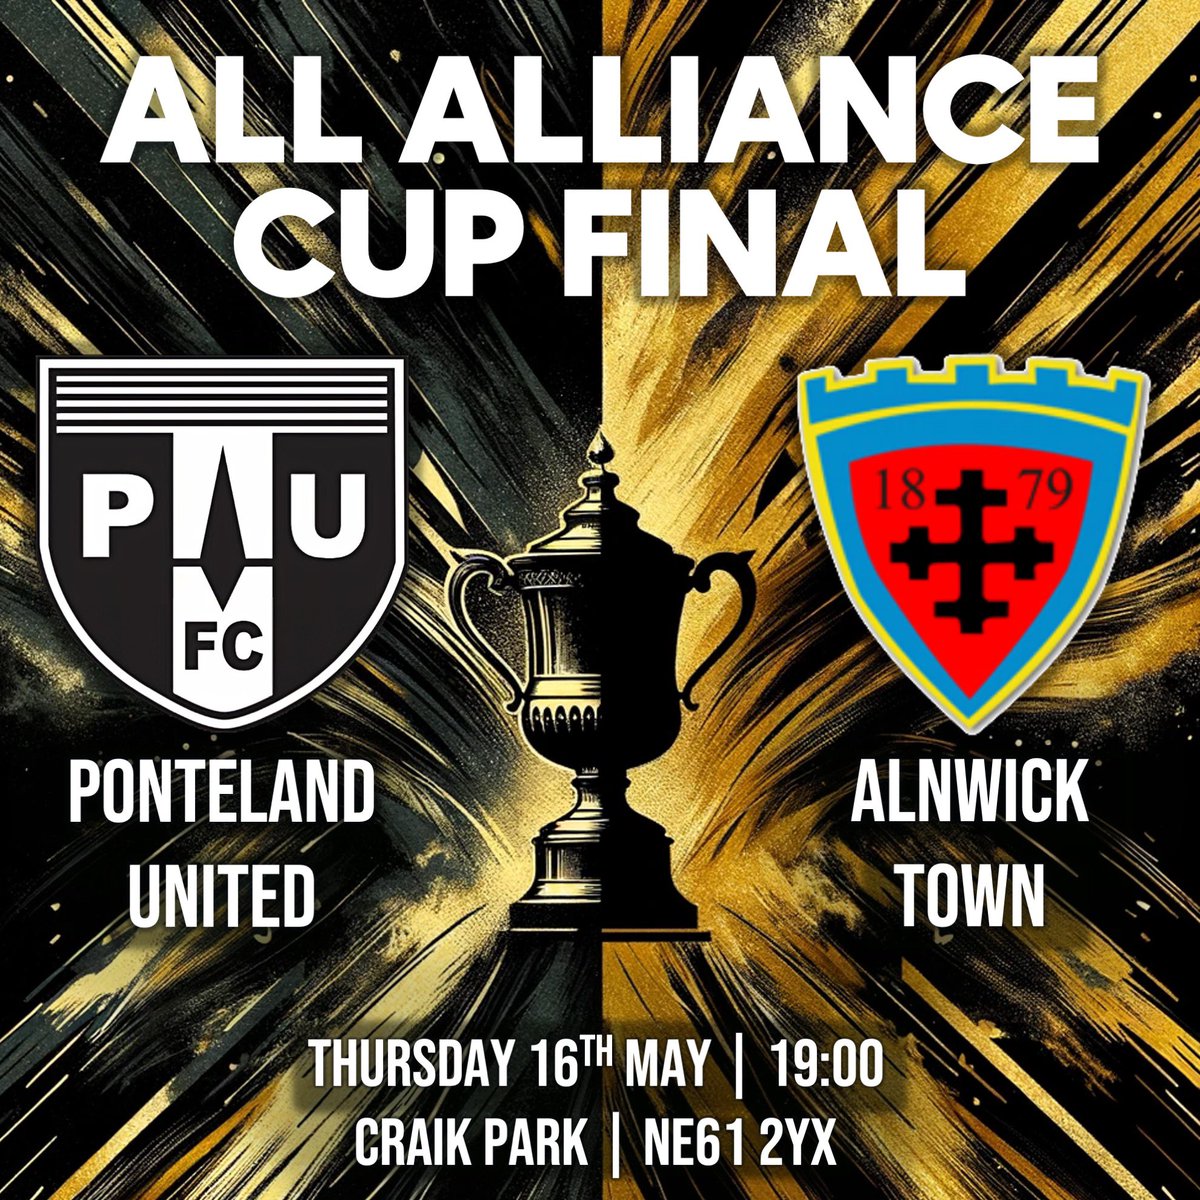 CUP FINAL DAY! ⌛️🏆 Ticket Prices: Adult - £4 Concessions - £2 U16 - Free (Must be accompained by an adult) Cash Only - Payment by card not available See you there United! 🖤🤍 #PUFC #UTP #SupportLocal